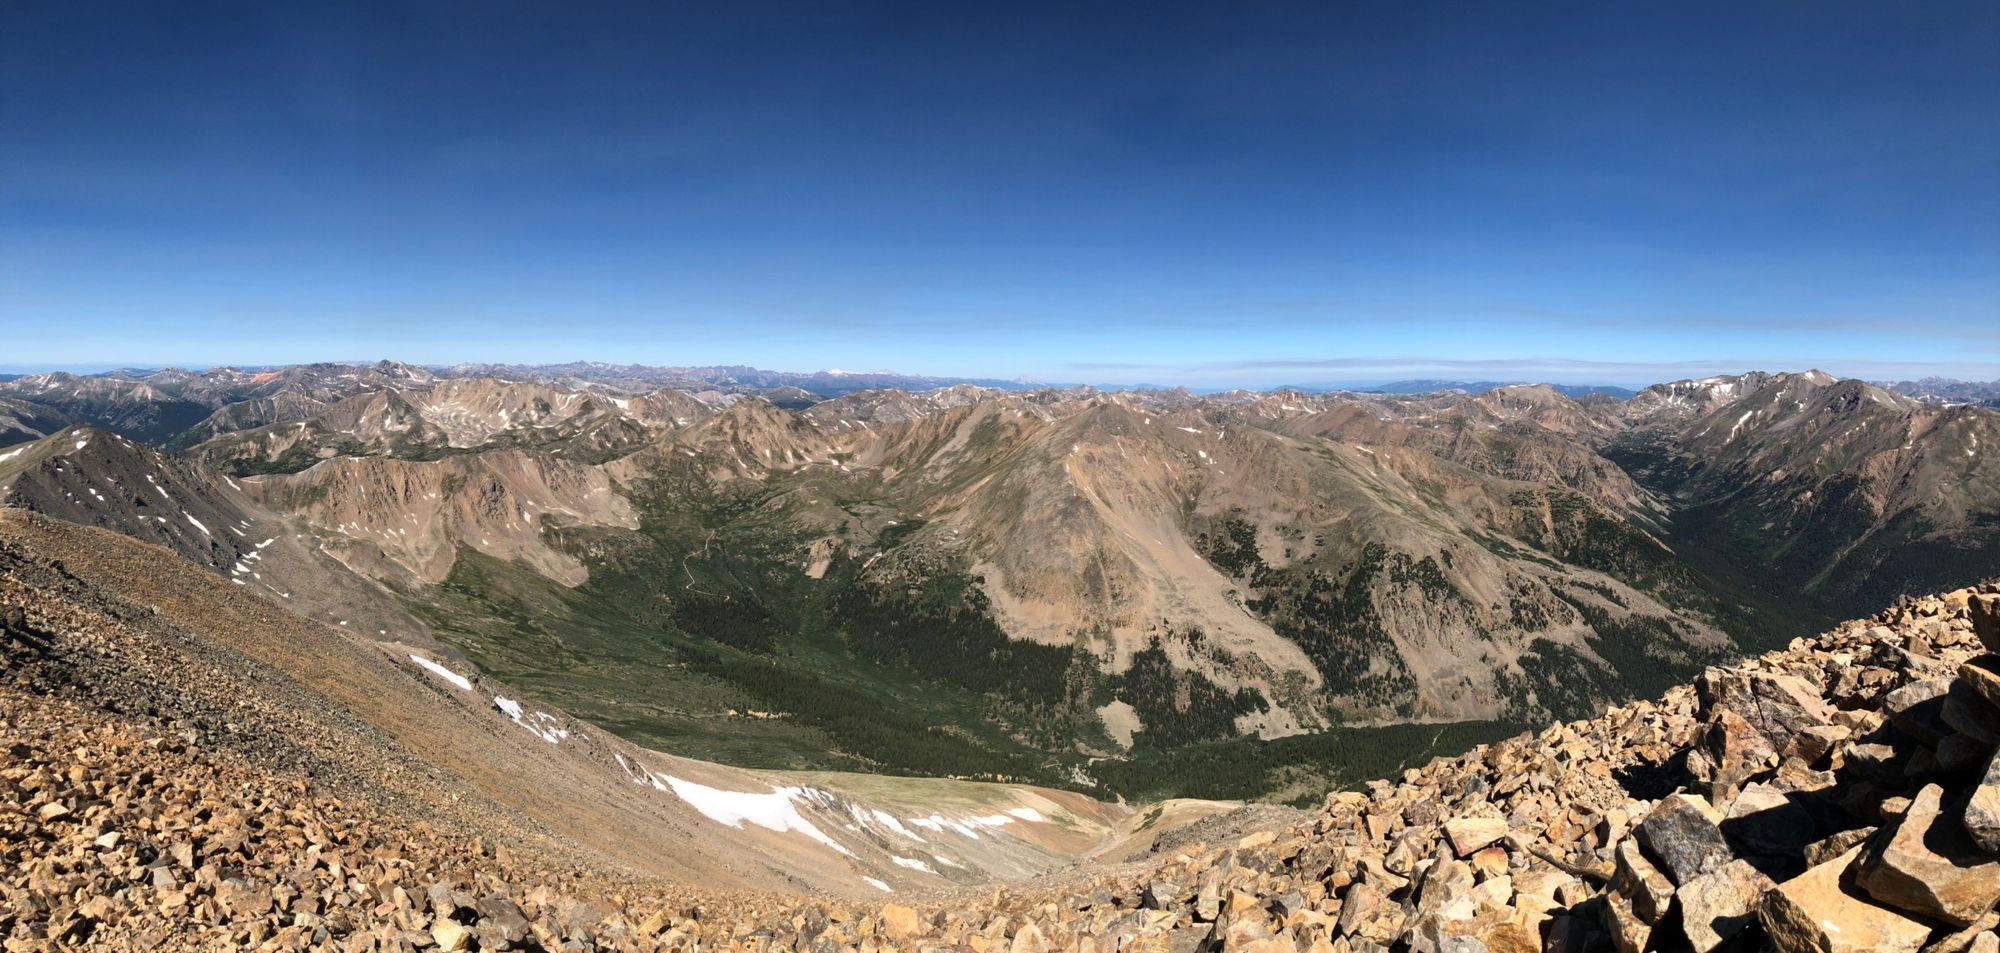 Panorama view from the summit